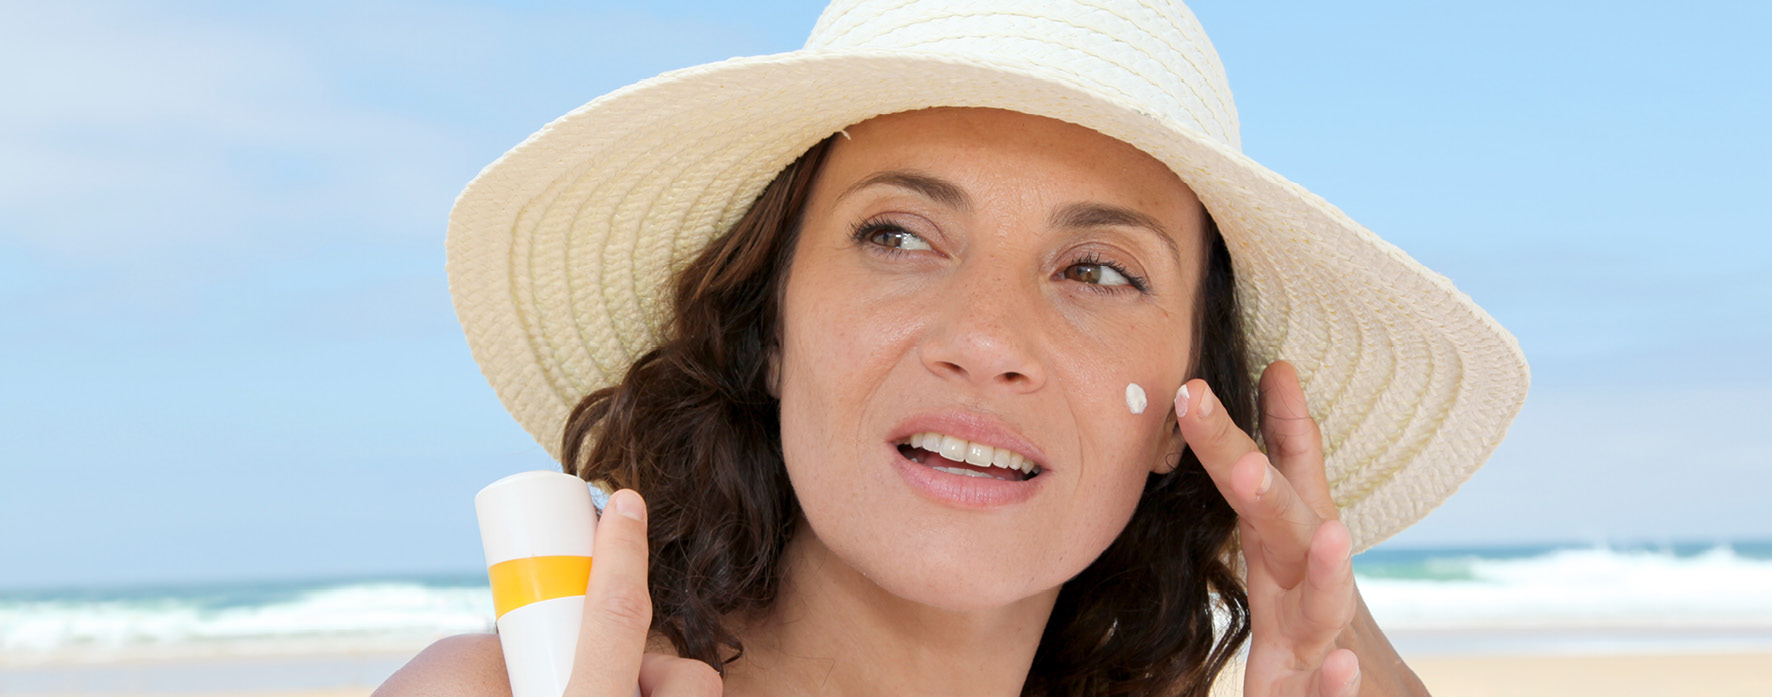 7 signs you may have increased risk of skin cancer